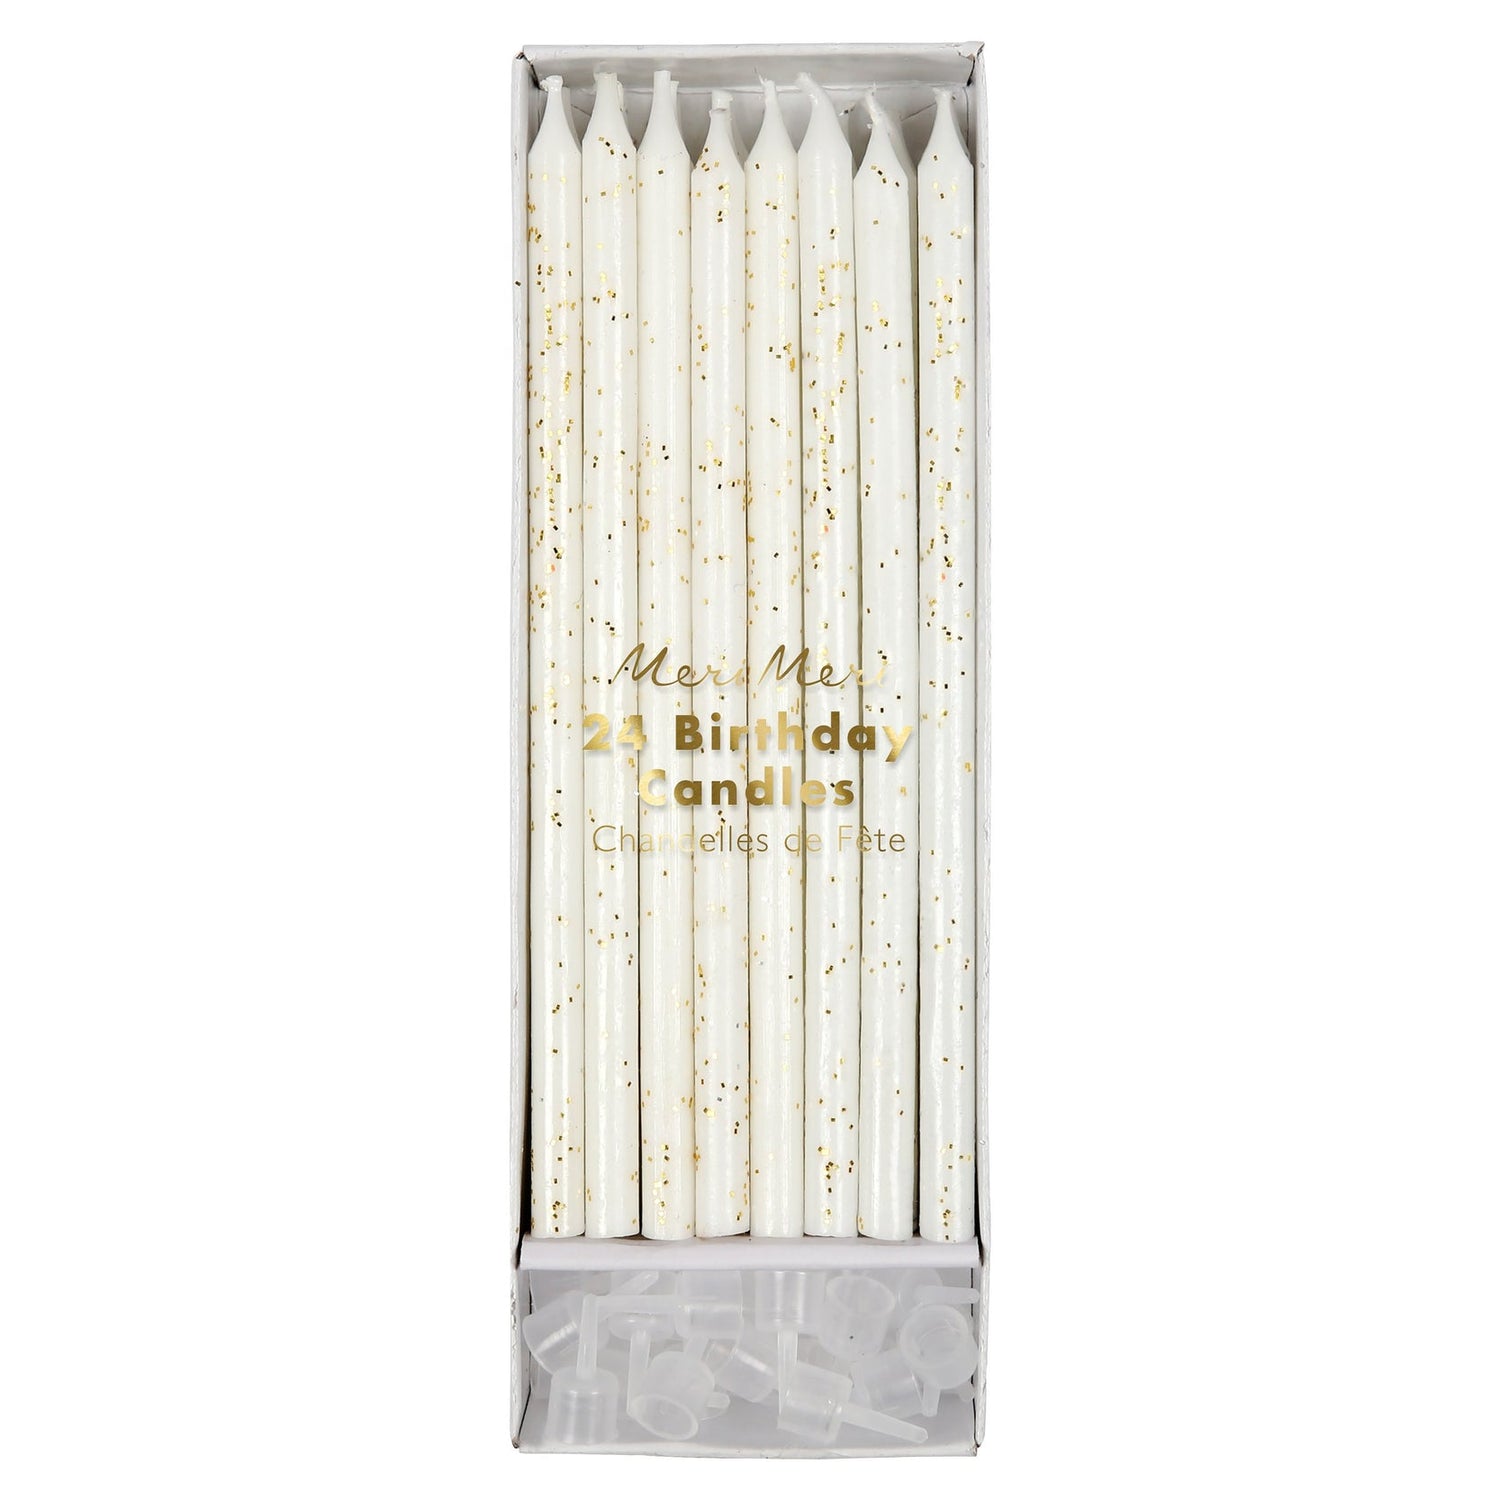 A box of 24 luxury white and Meri Meri gold glitter speckled birthday candles with holders.